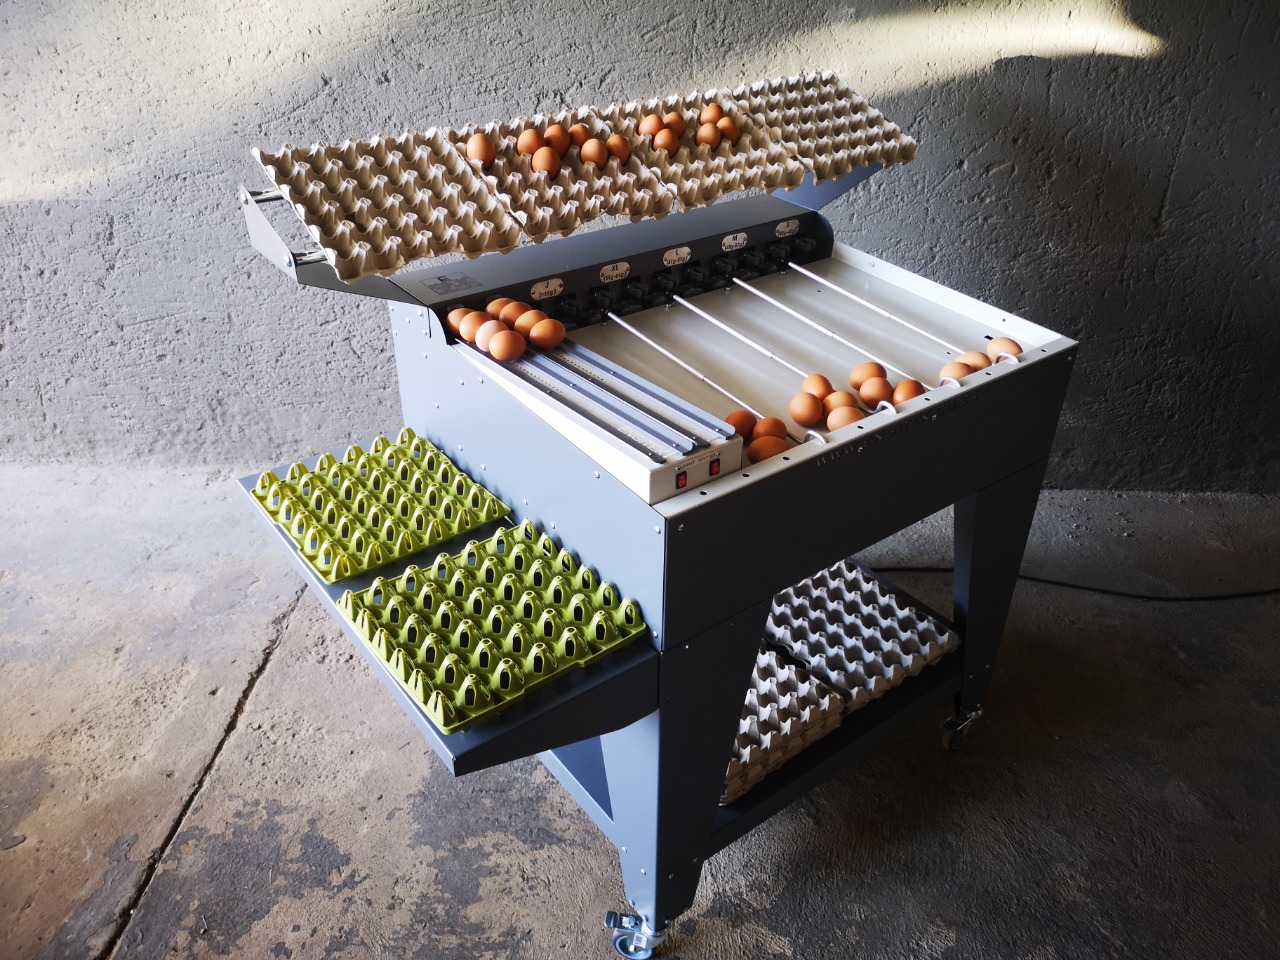 Chickens - Egg grading machine and egg washer